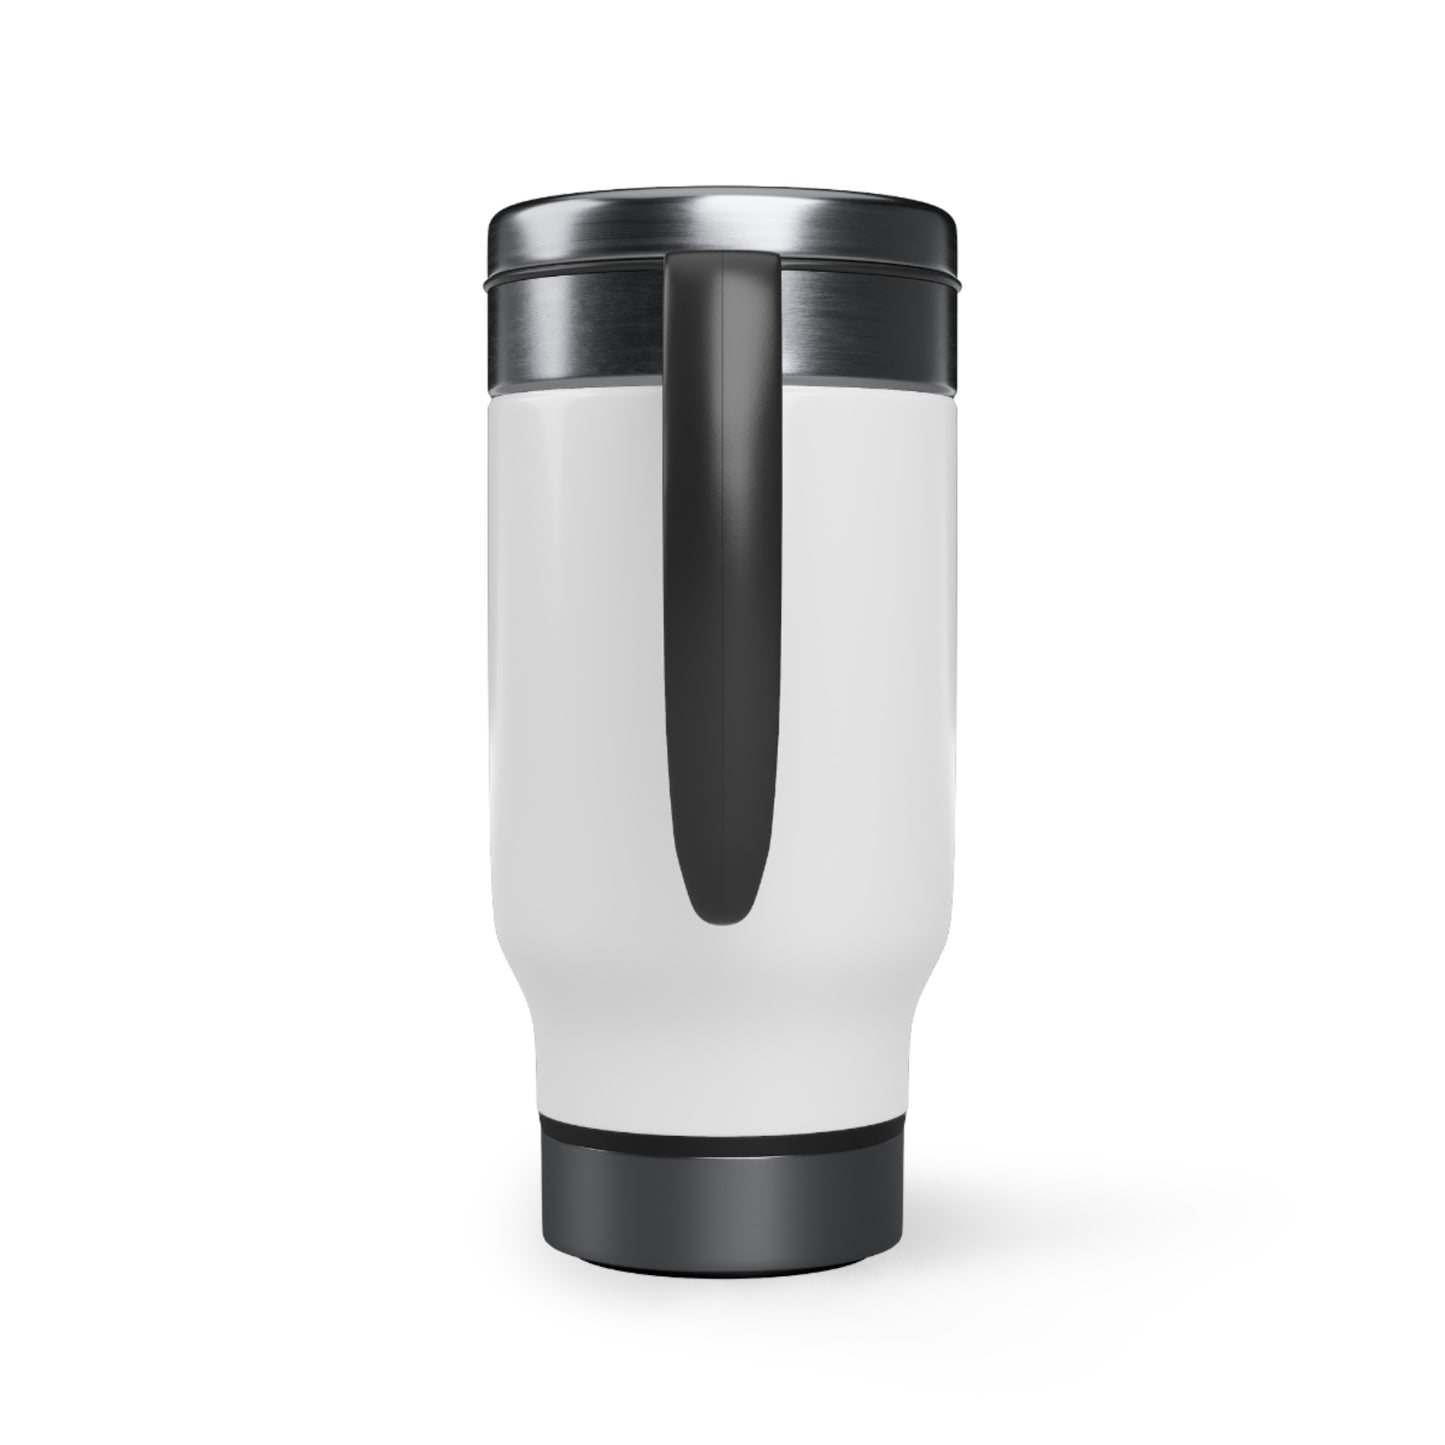 Jet Fuel Only Stainless Steel Travel Mug with Handle, 14oz | Equip Your Fave Pilot With This Sweet Coffee Cup